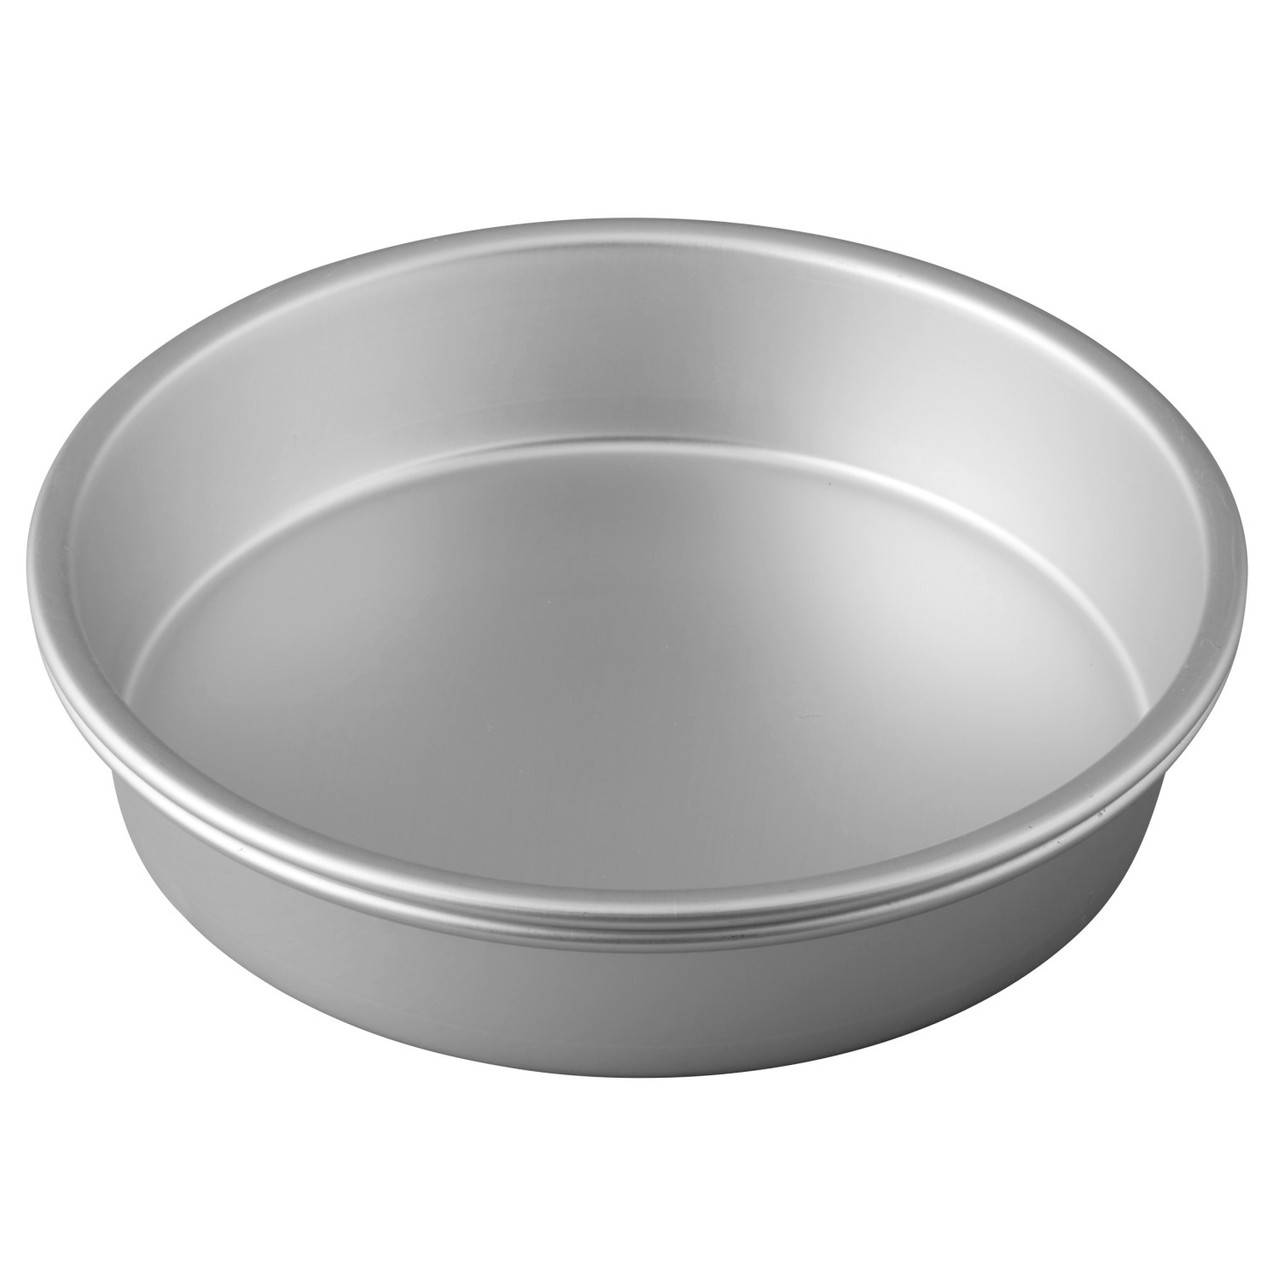 China ABLPACK 2500ML/84.5OZ Round shape aluminum foil baking container with  PET/PP lid Manufacturer and Supplier | ABL